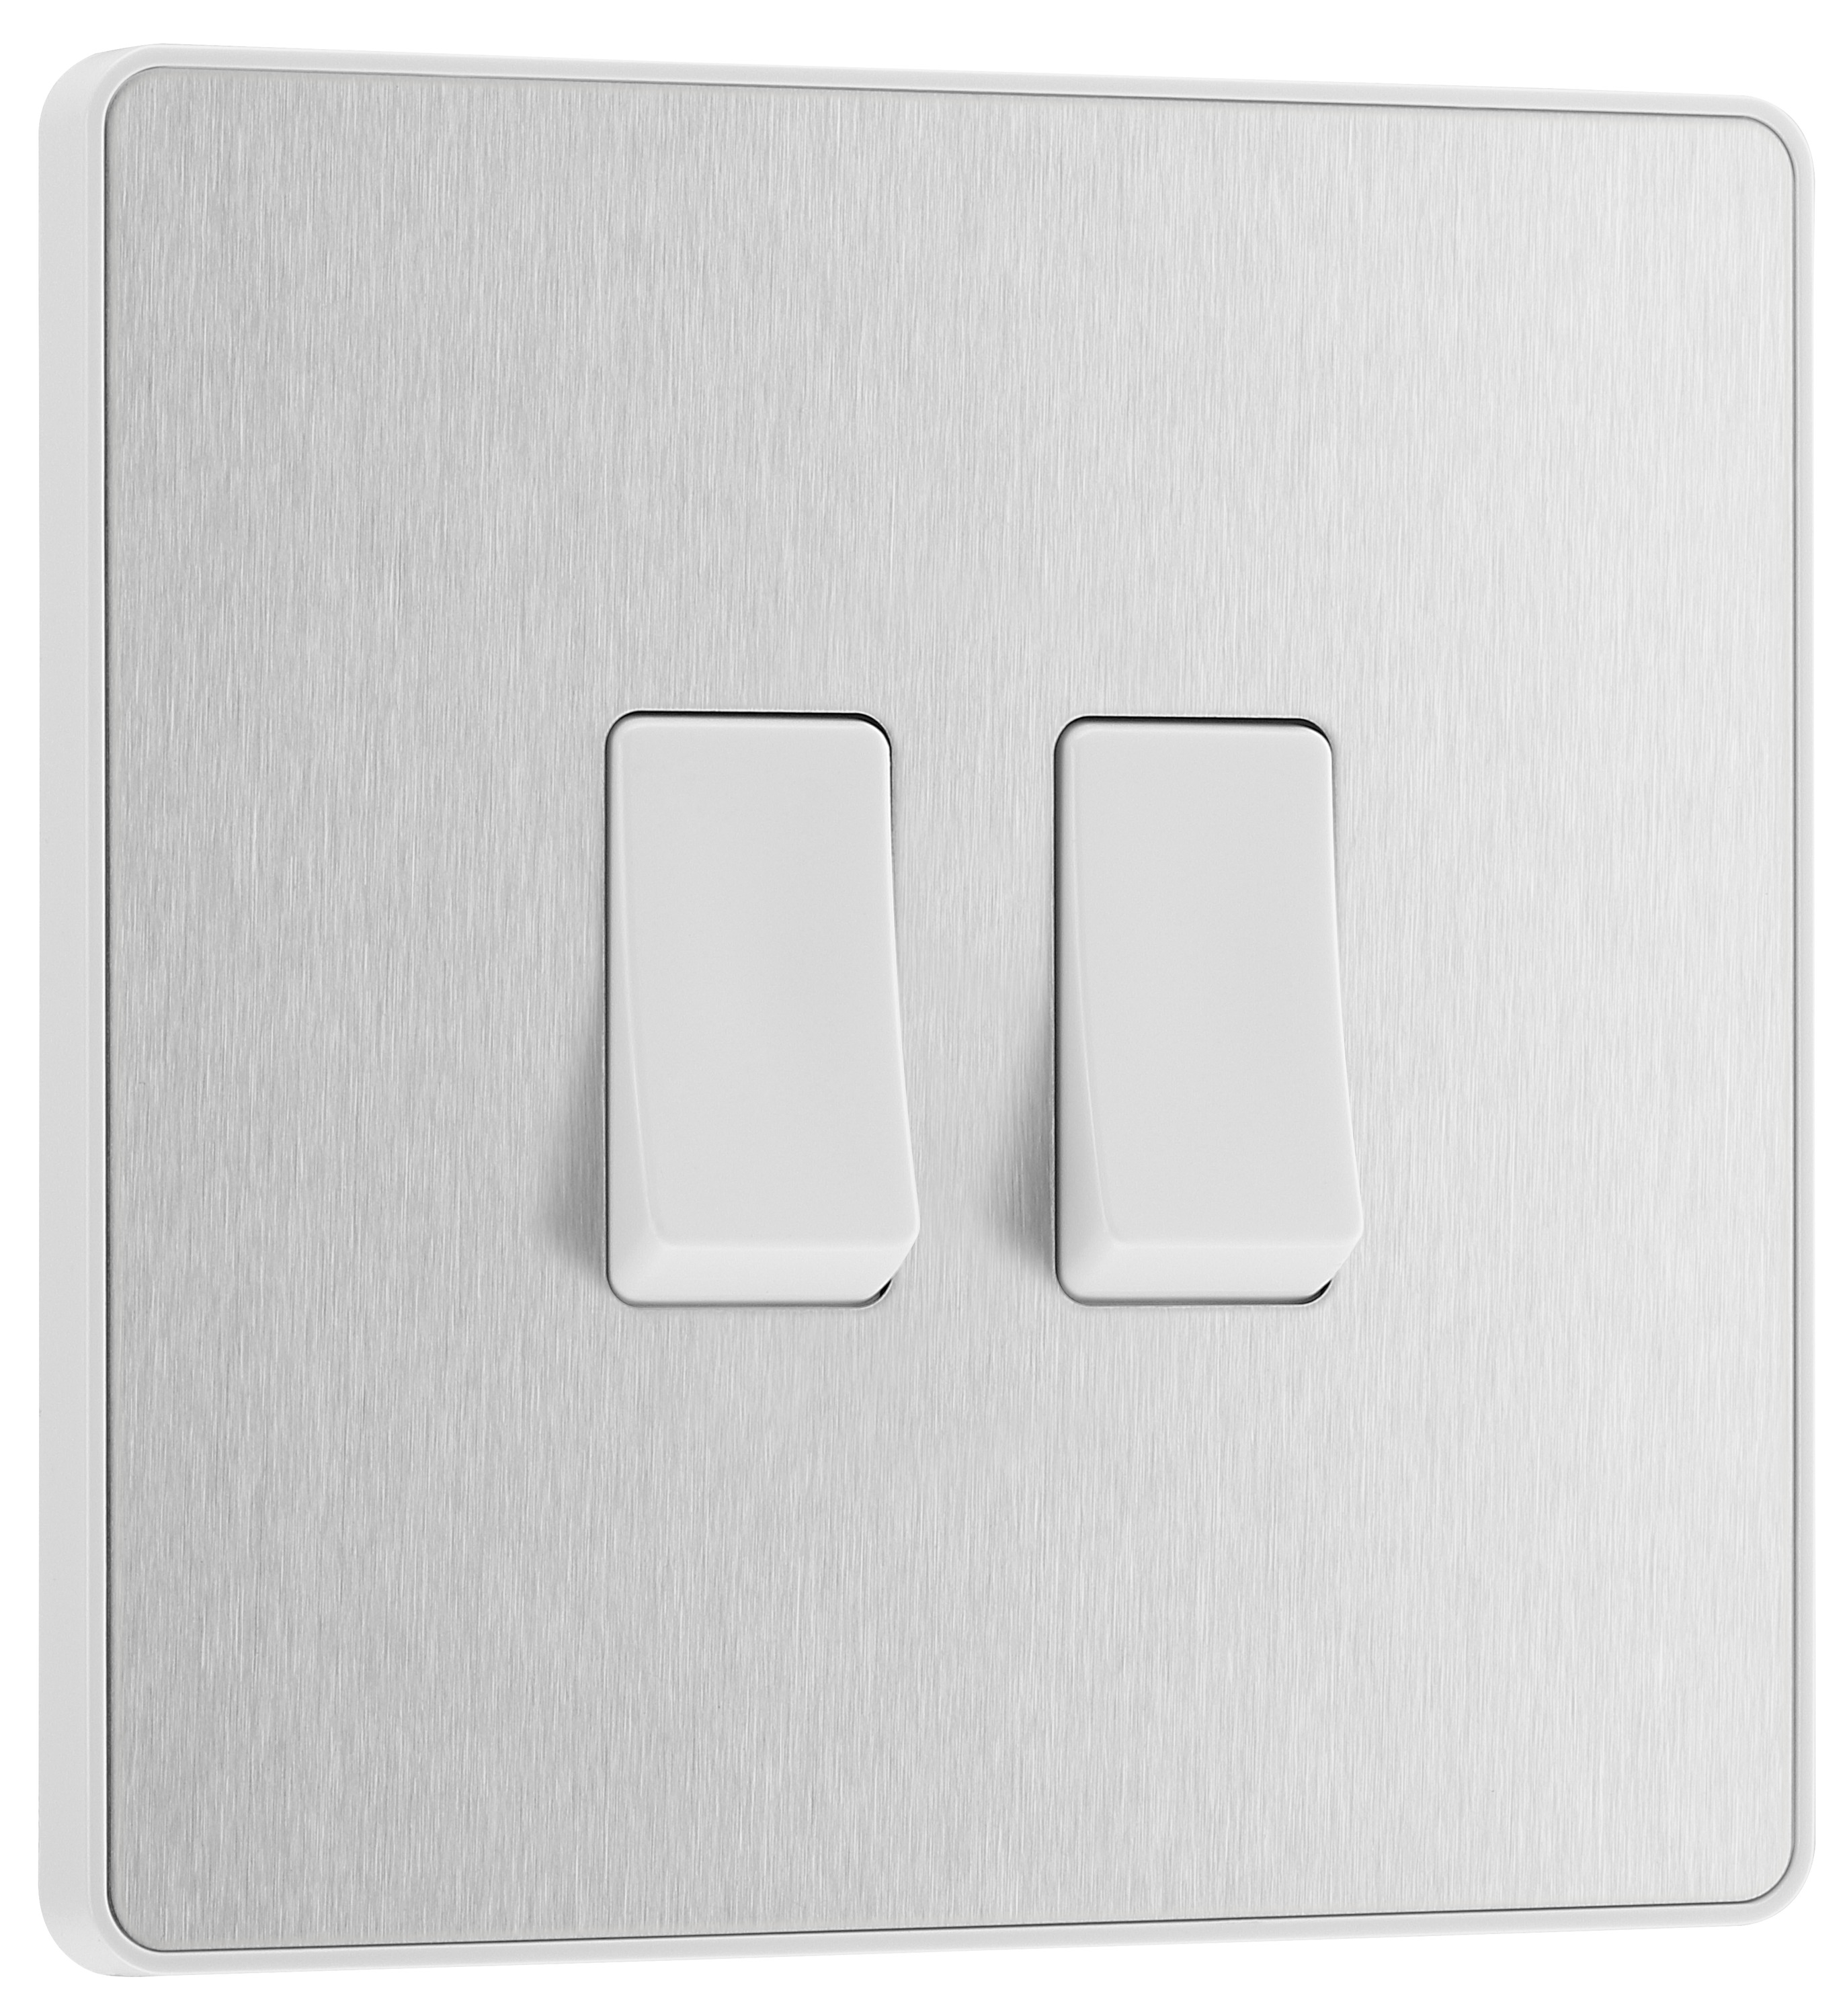 BG Evolve Brushed Steel 20A 16Ax Double Light Switch - 2 Way